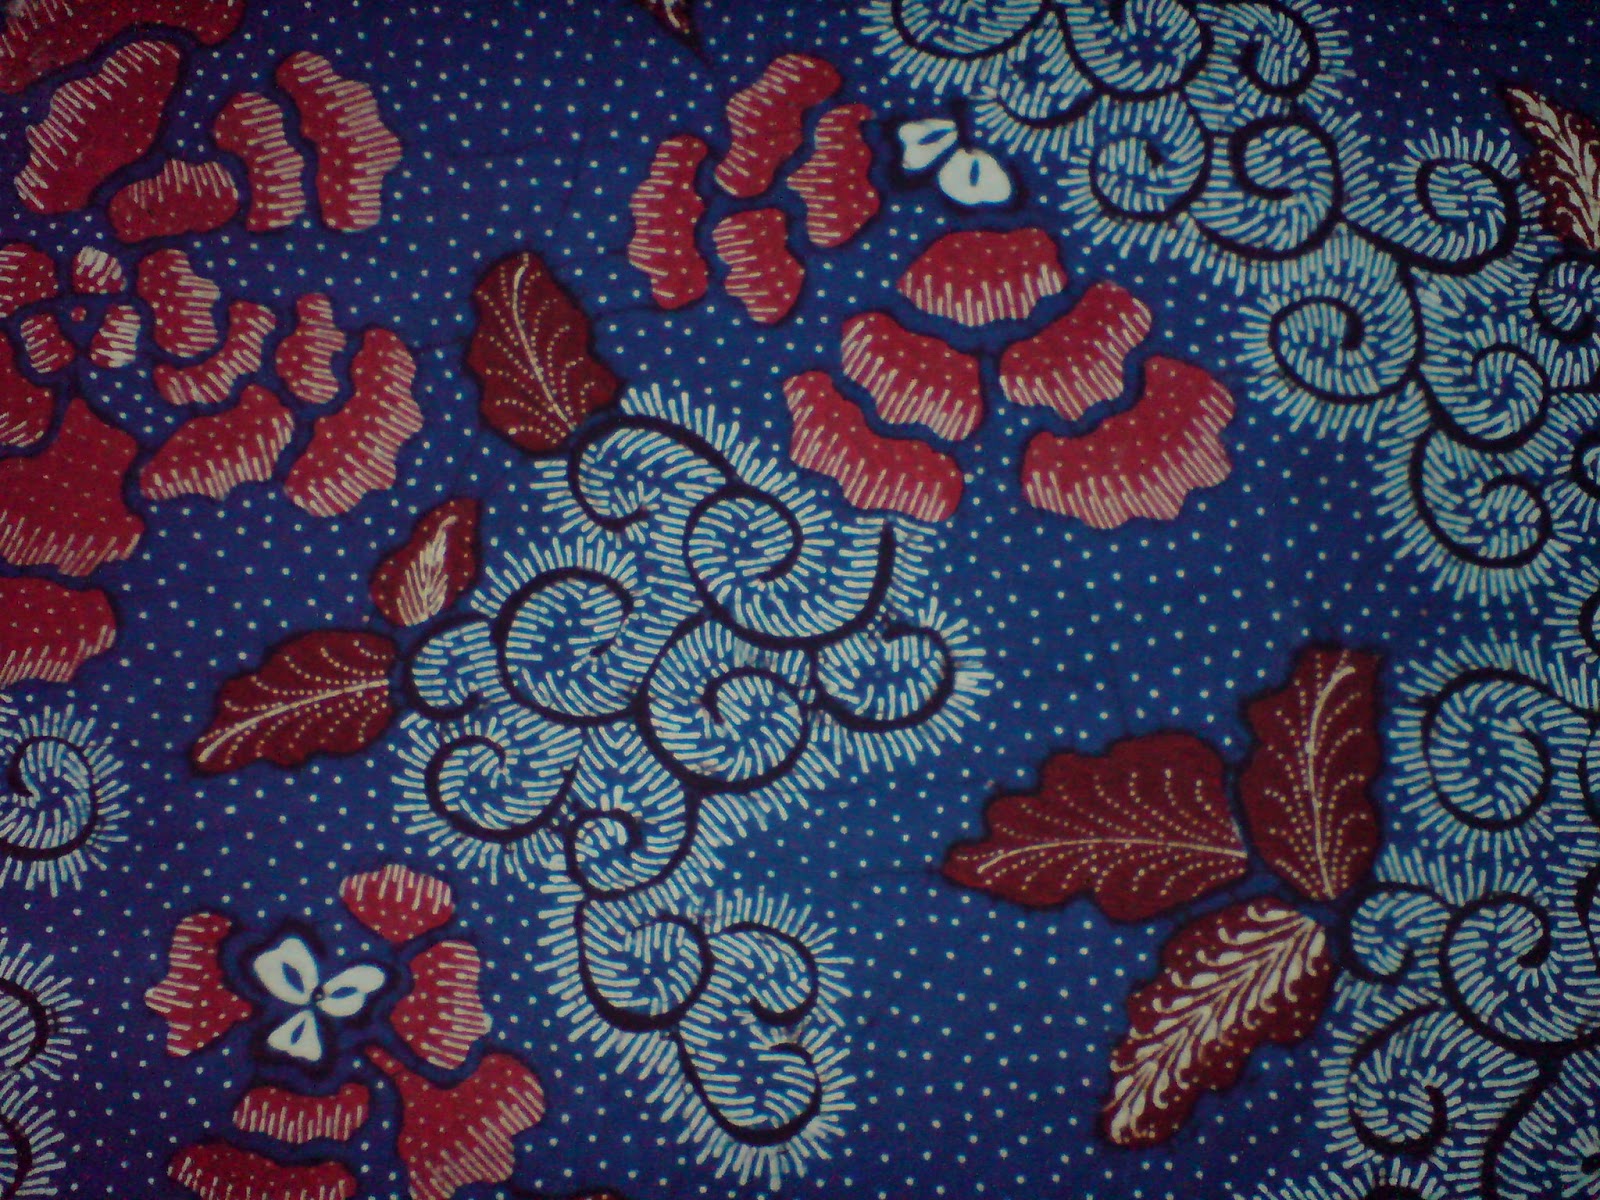 20+ 1000+ images about Fab Fabrics from Bali and Beyond on Pinterest